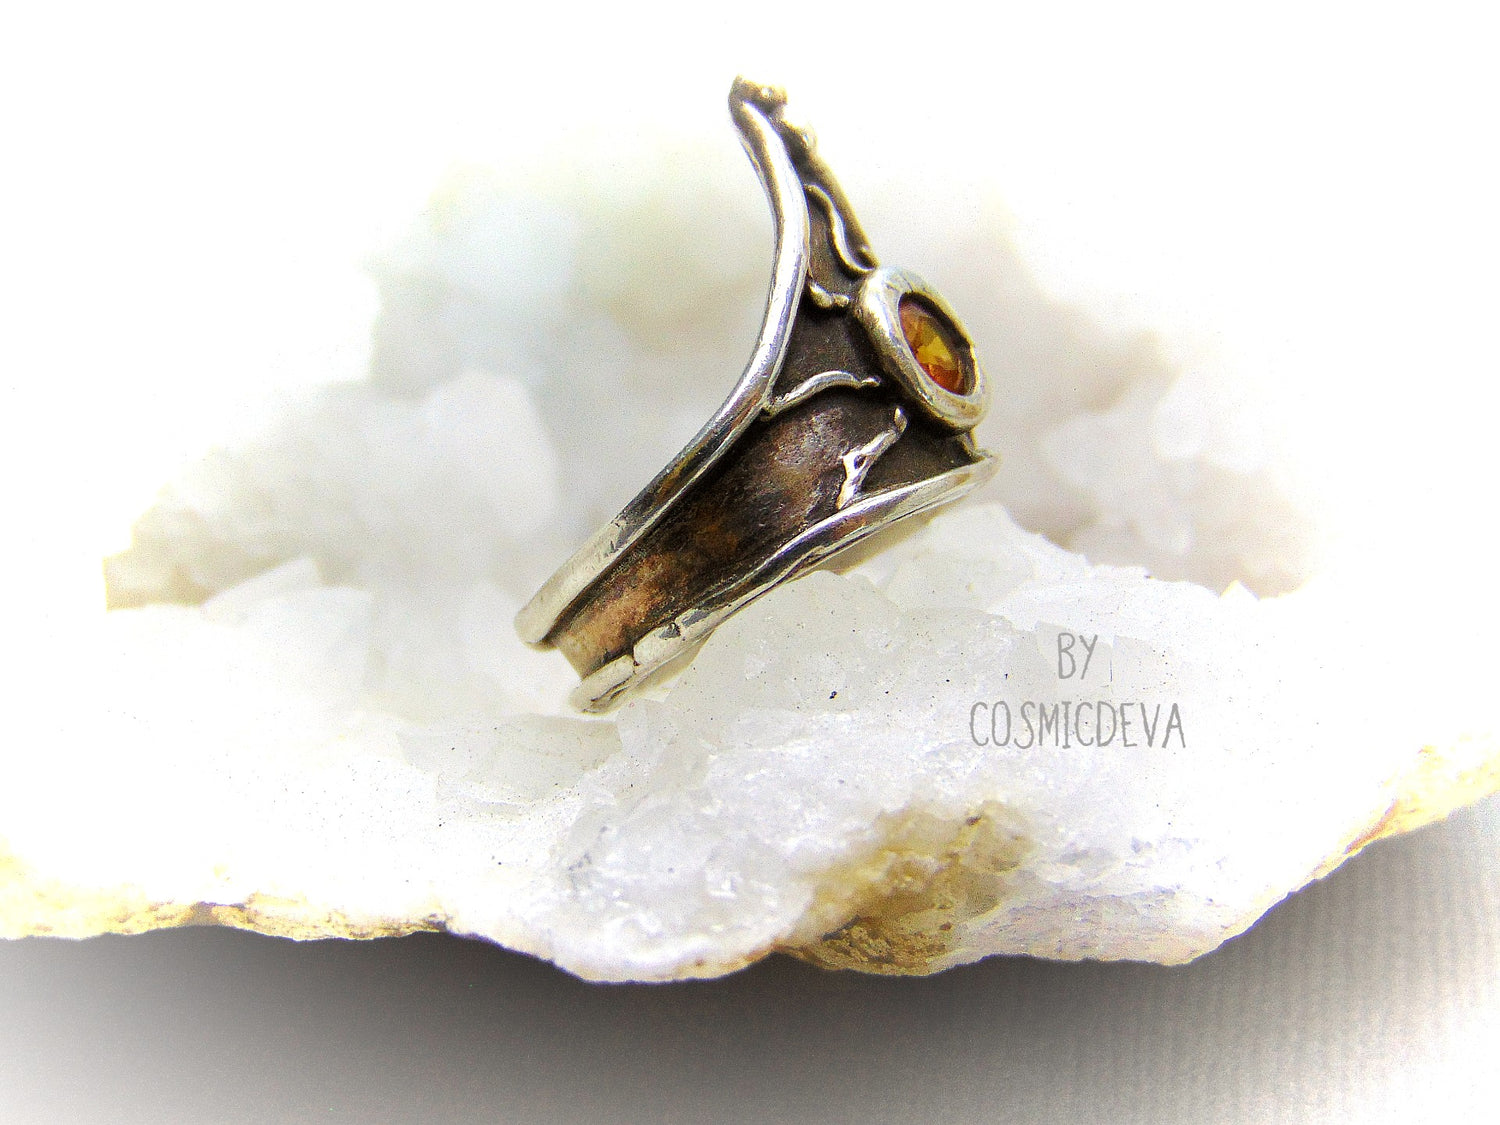 Medieval Triangle Shield Sterling Silver Citrine Size US 7.5 Ring. Beautiful hand sculptured medieval triangle shaped shield sterling silver ring with a 5 mm round citrine stone. This Ring is made of solid pure .950 sterling silver and hallmarked as it. The ring was oxidized to give it a vintage antique design. - CosmicDeva